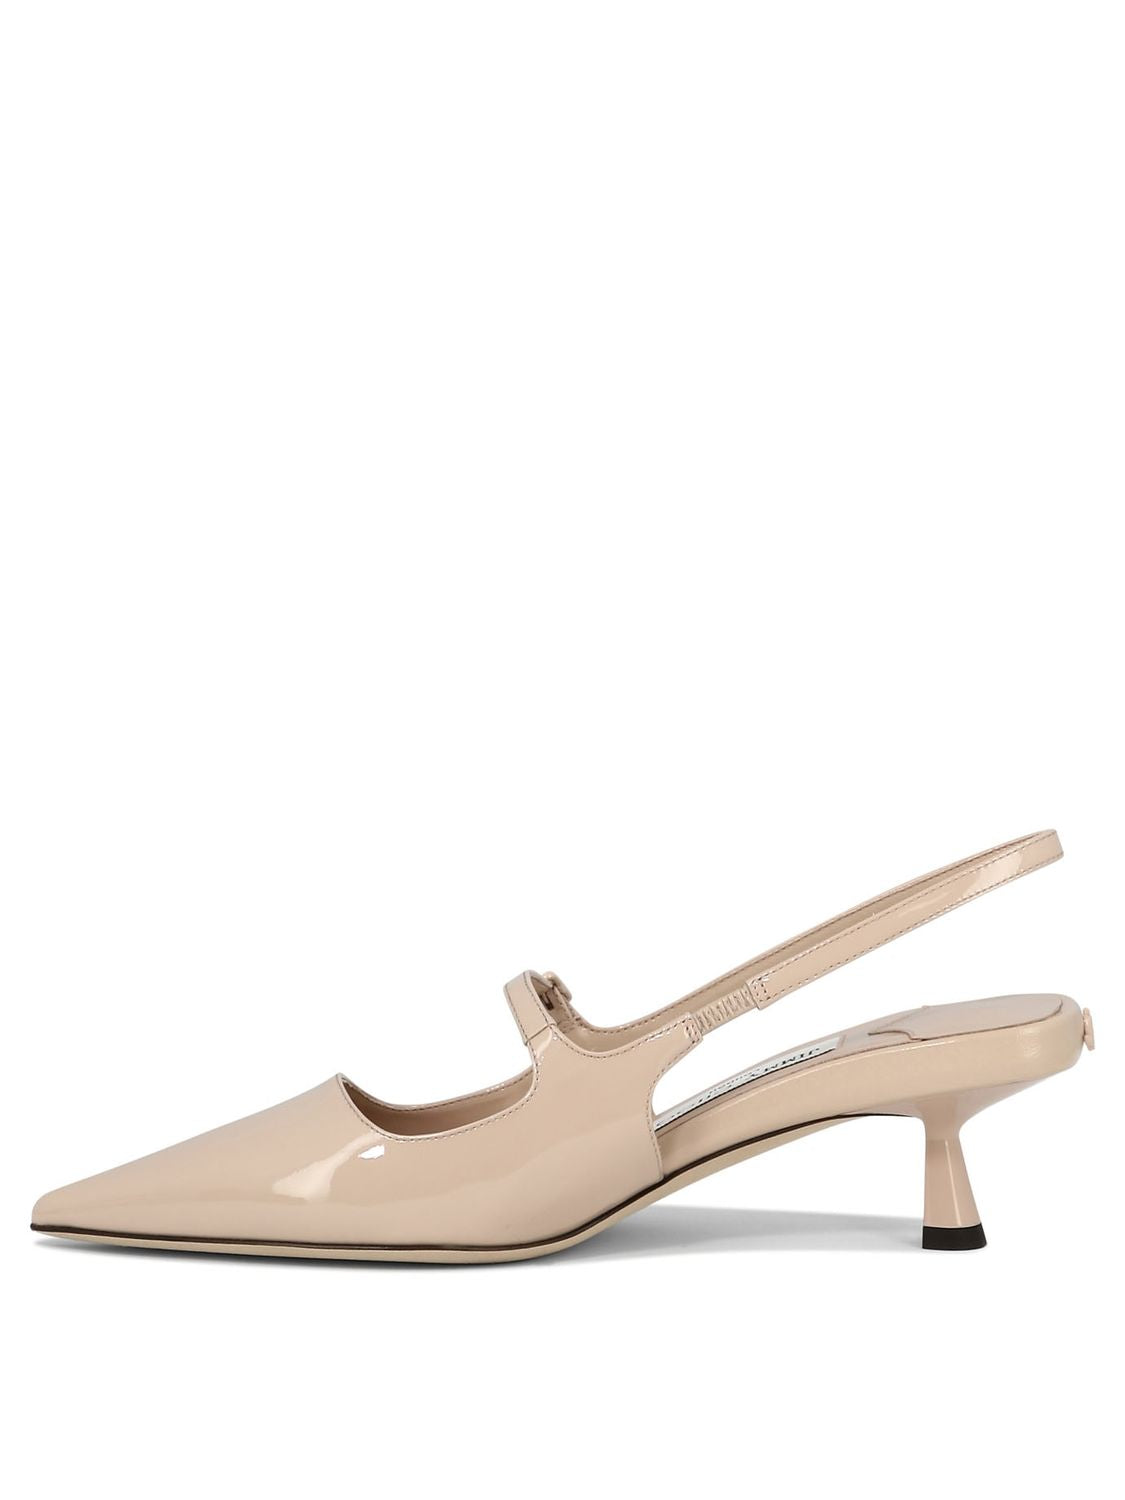 JIMMY CHOO Sophisticated Slingbacks in Pink Leather for Women